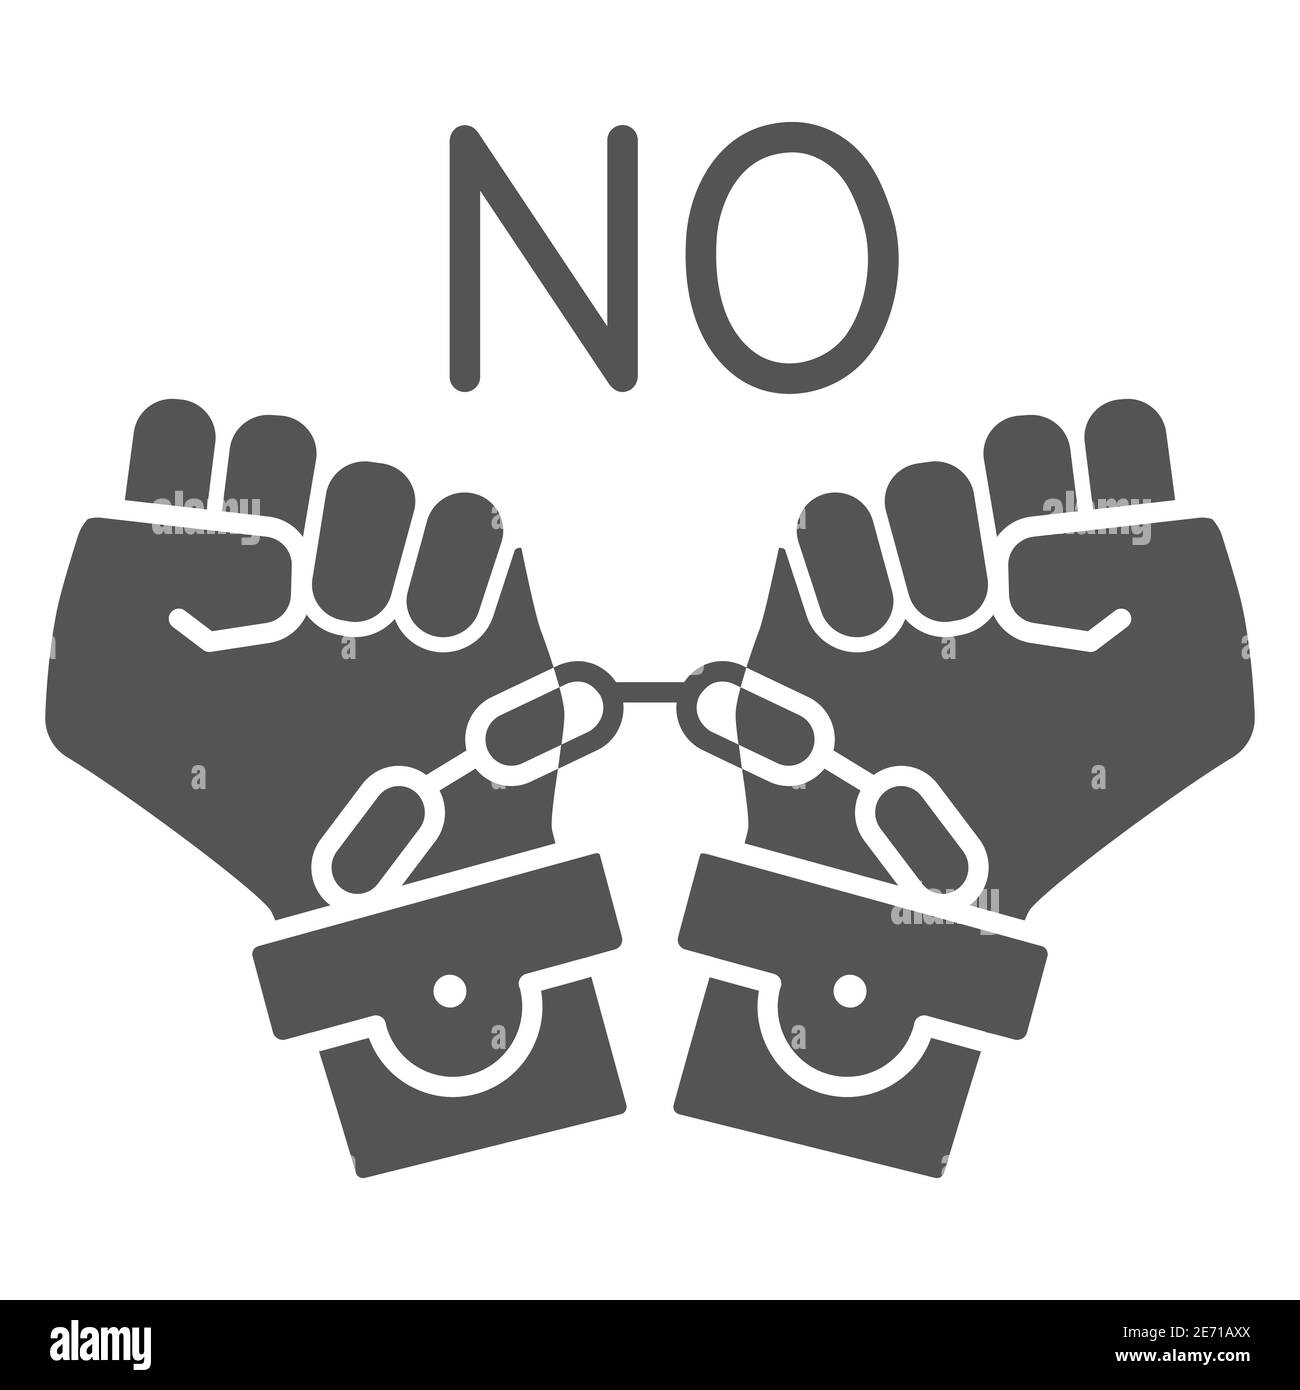 No to shackles symbol solid icon, Black lives matter concept, No violence against blacks sign on white background, handcuffed hands icon in glyph Stock Vector